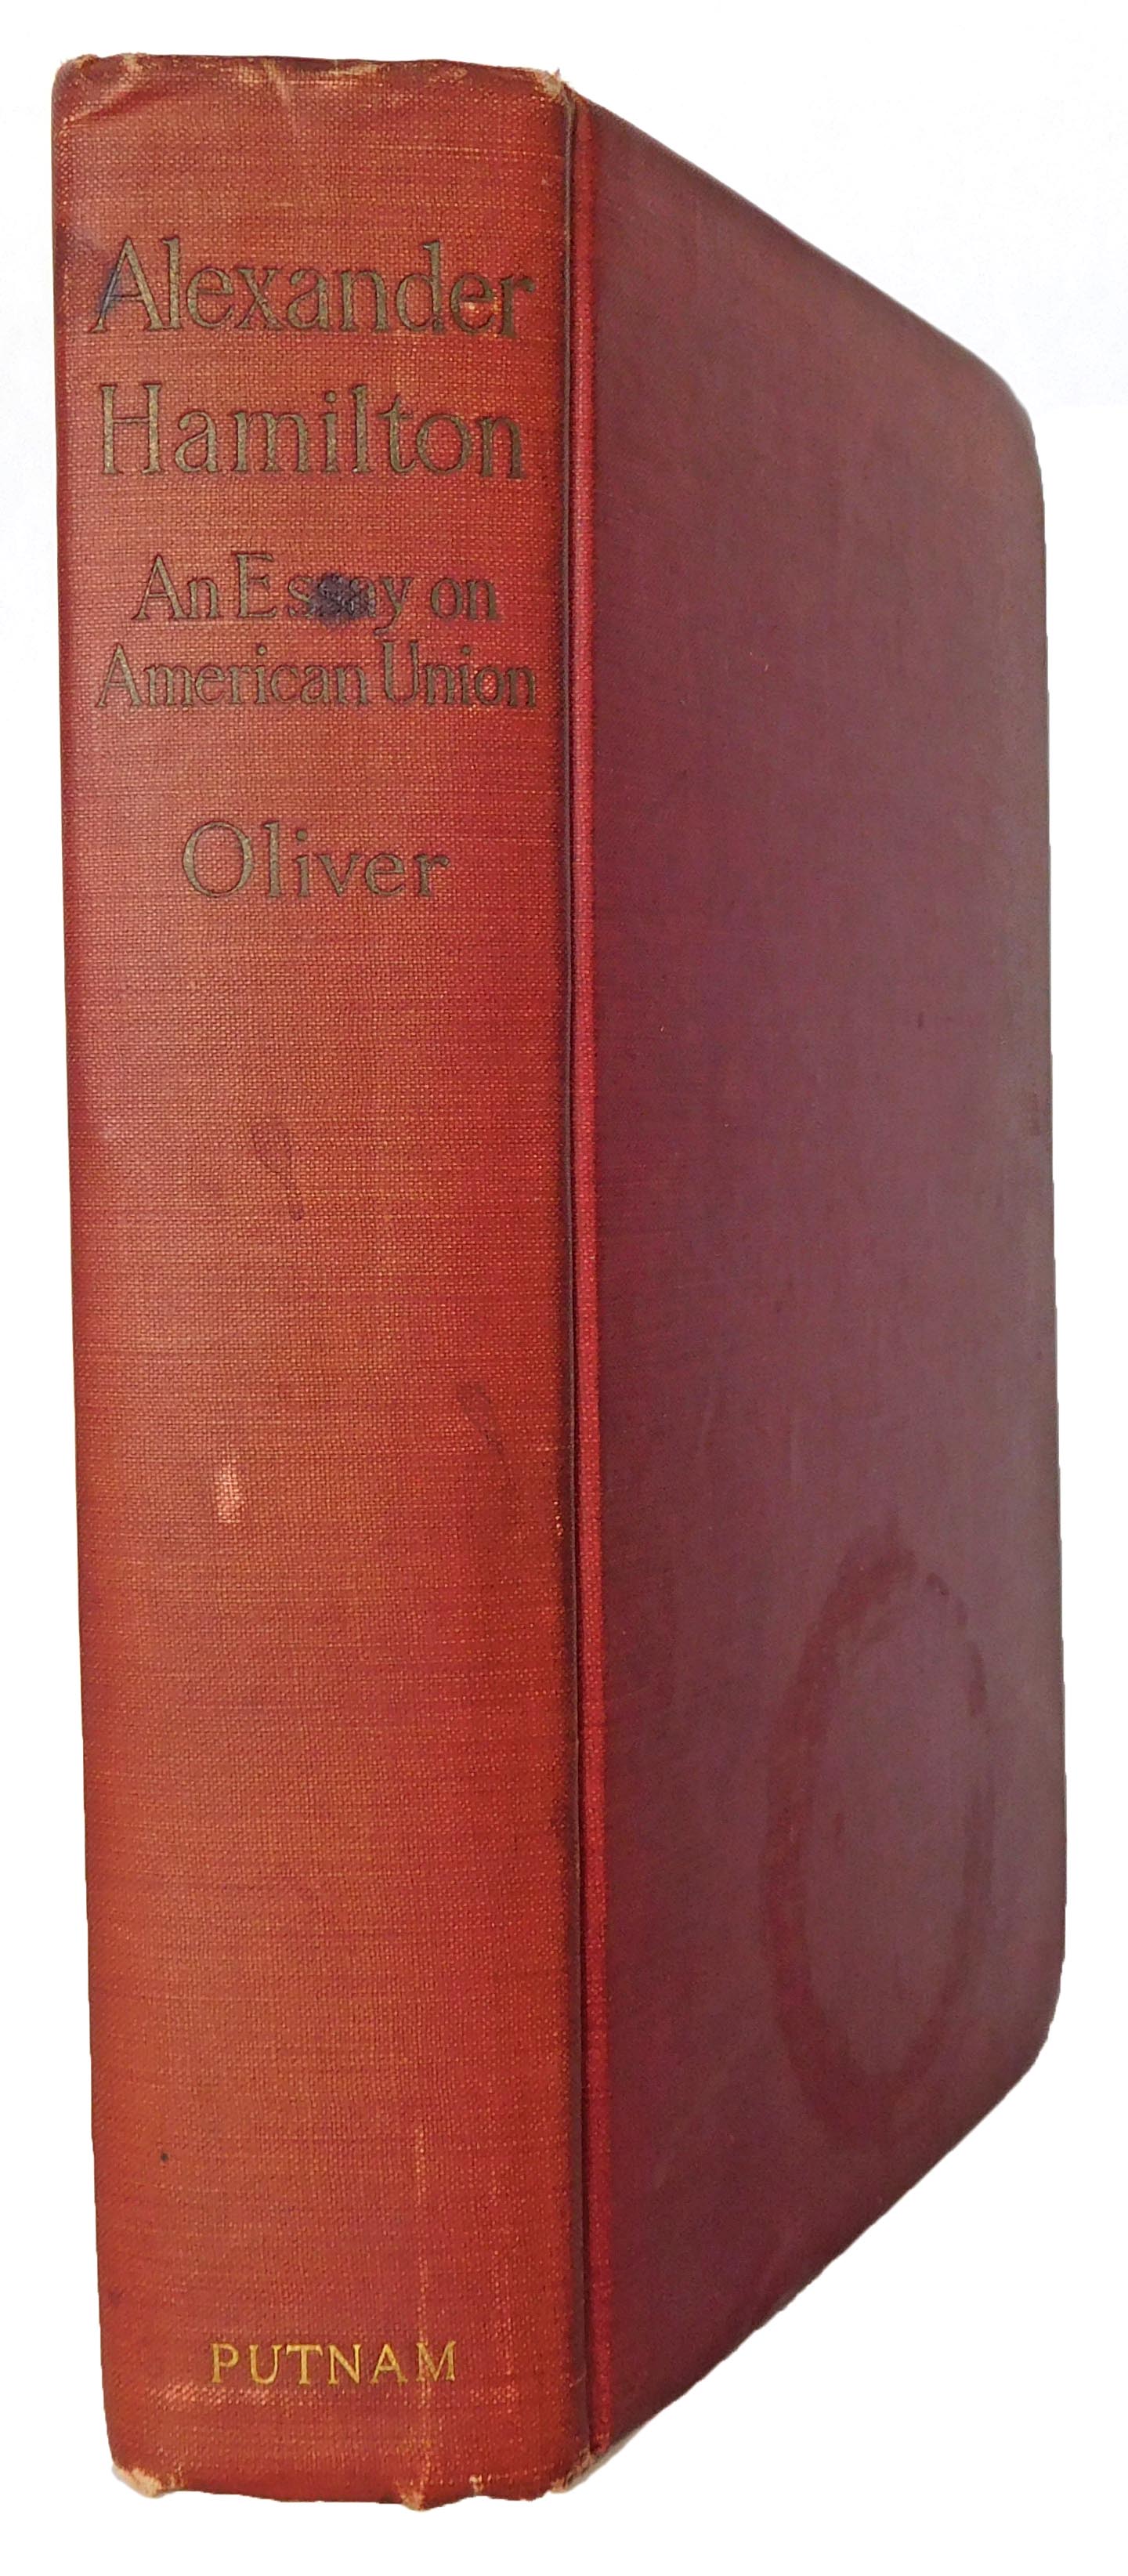 Oliver, Frederick Scott - Alexander Hamilton, An Essay on American Union [this copy with the inscription 